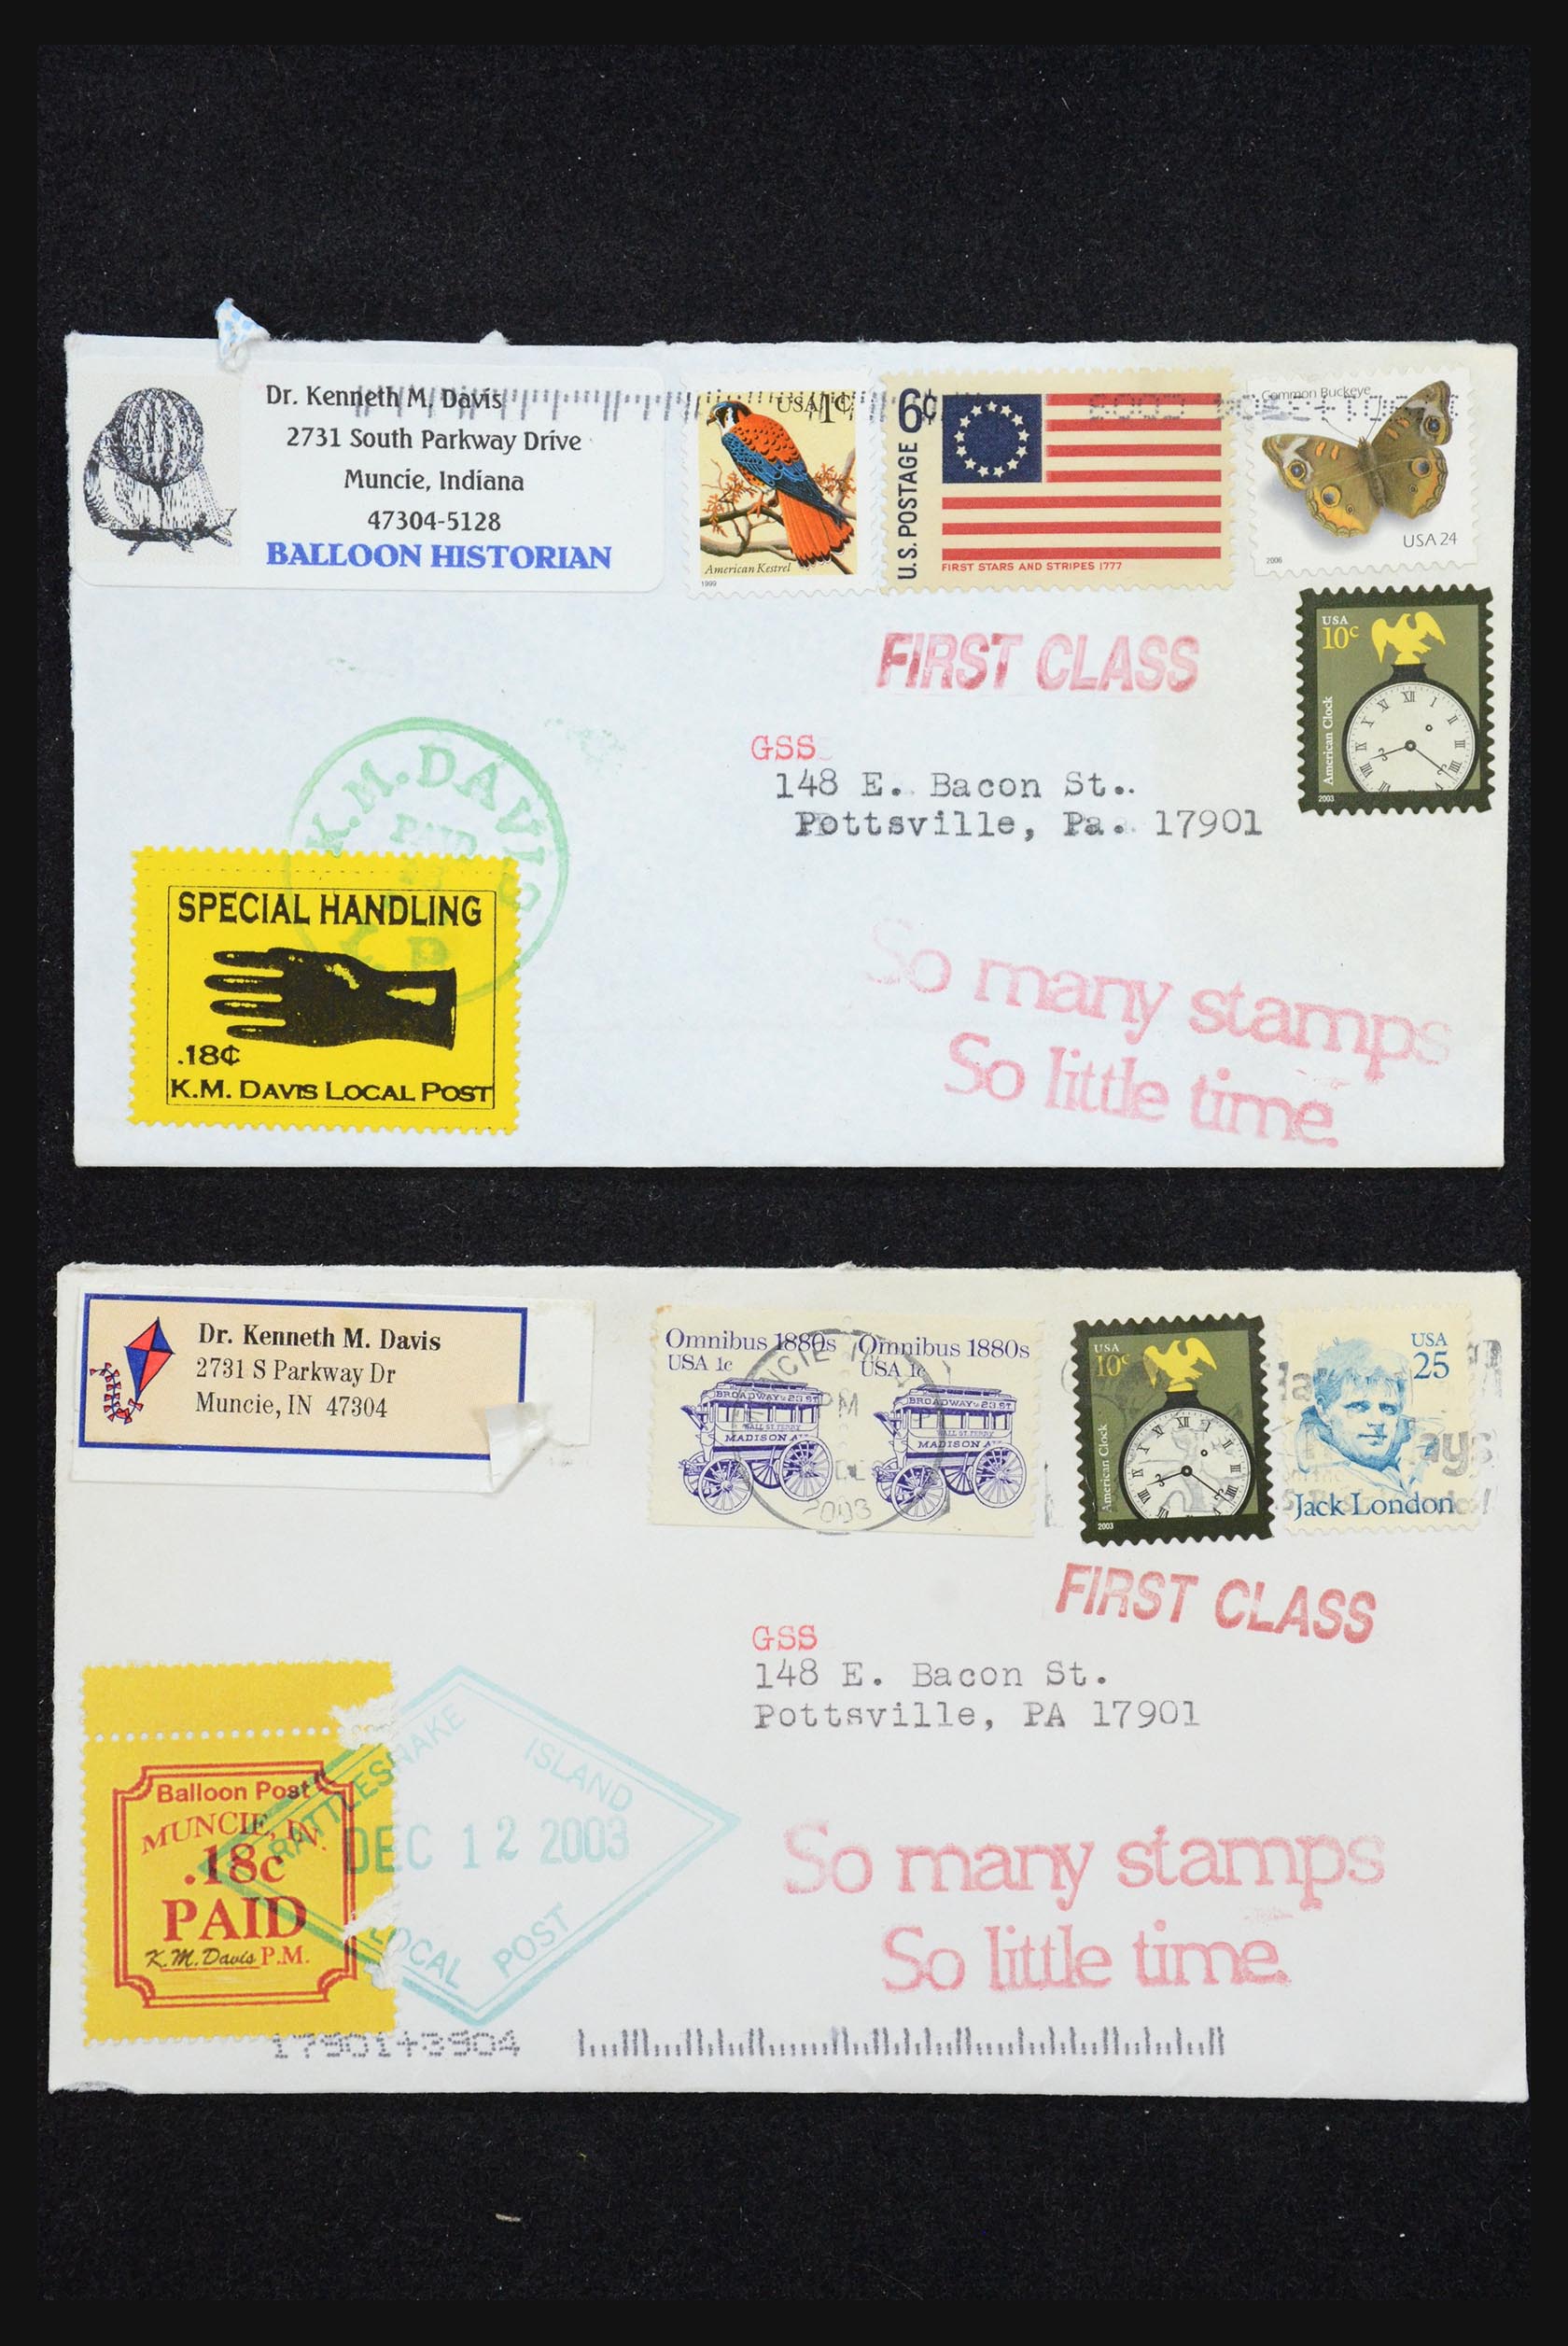 31530 072 - 31530 USA special covers.